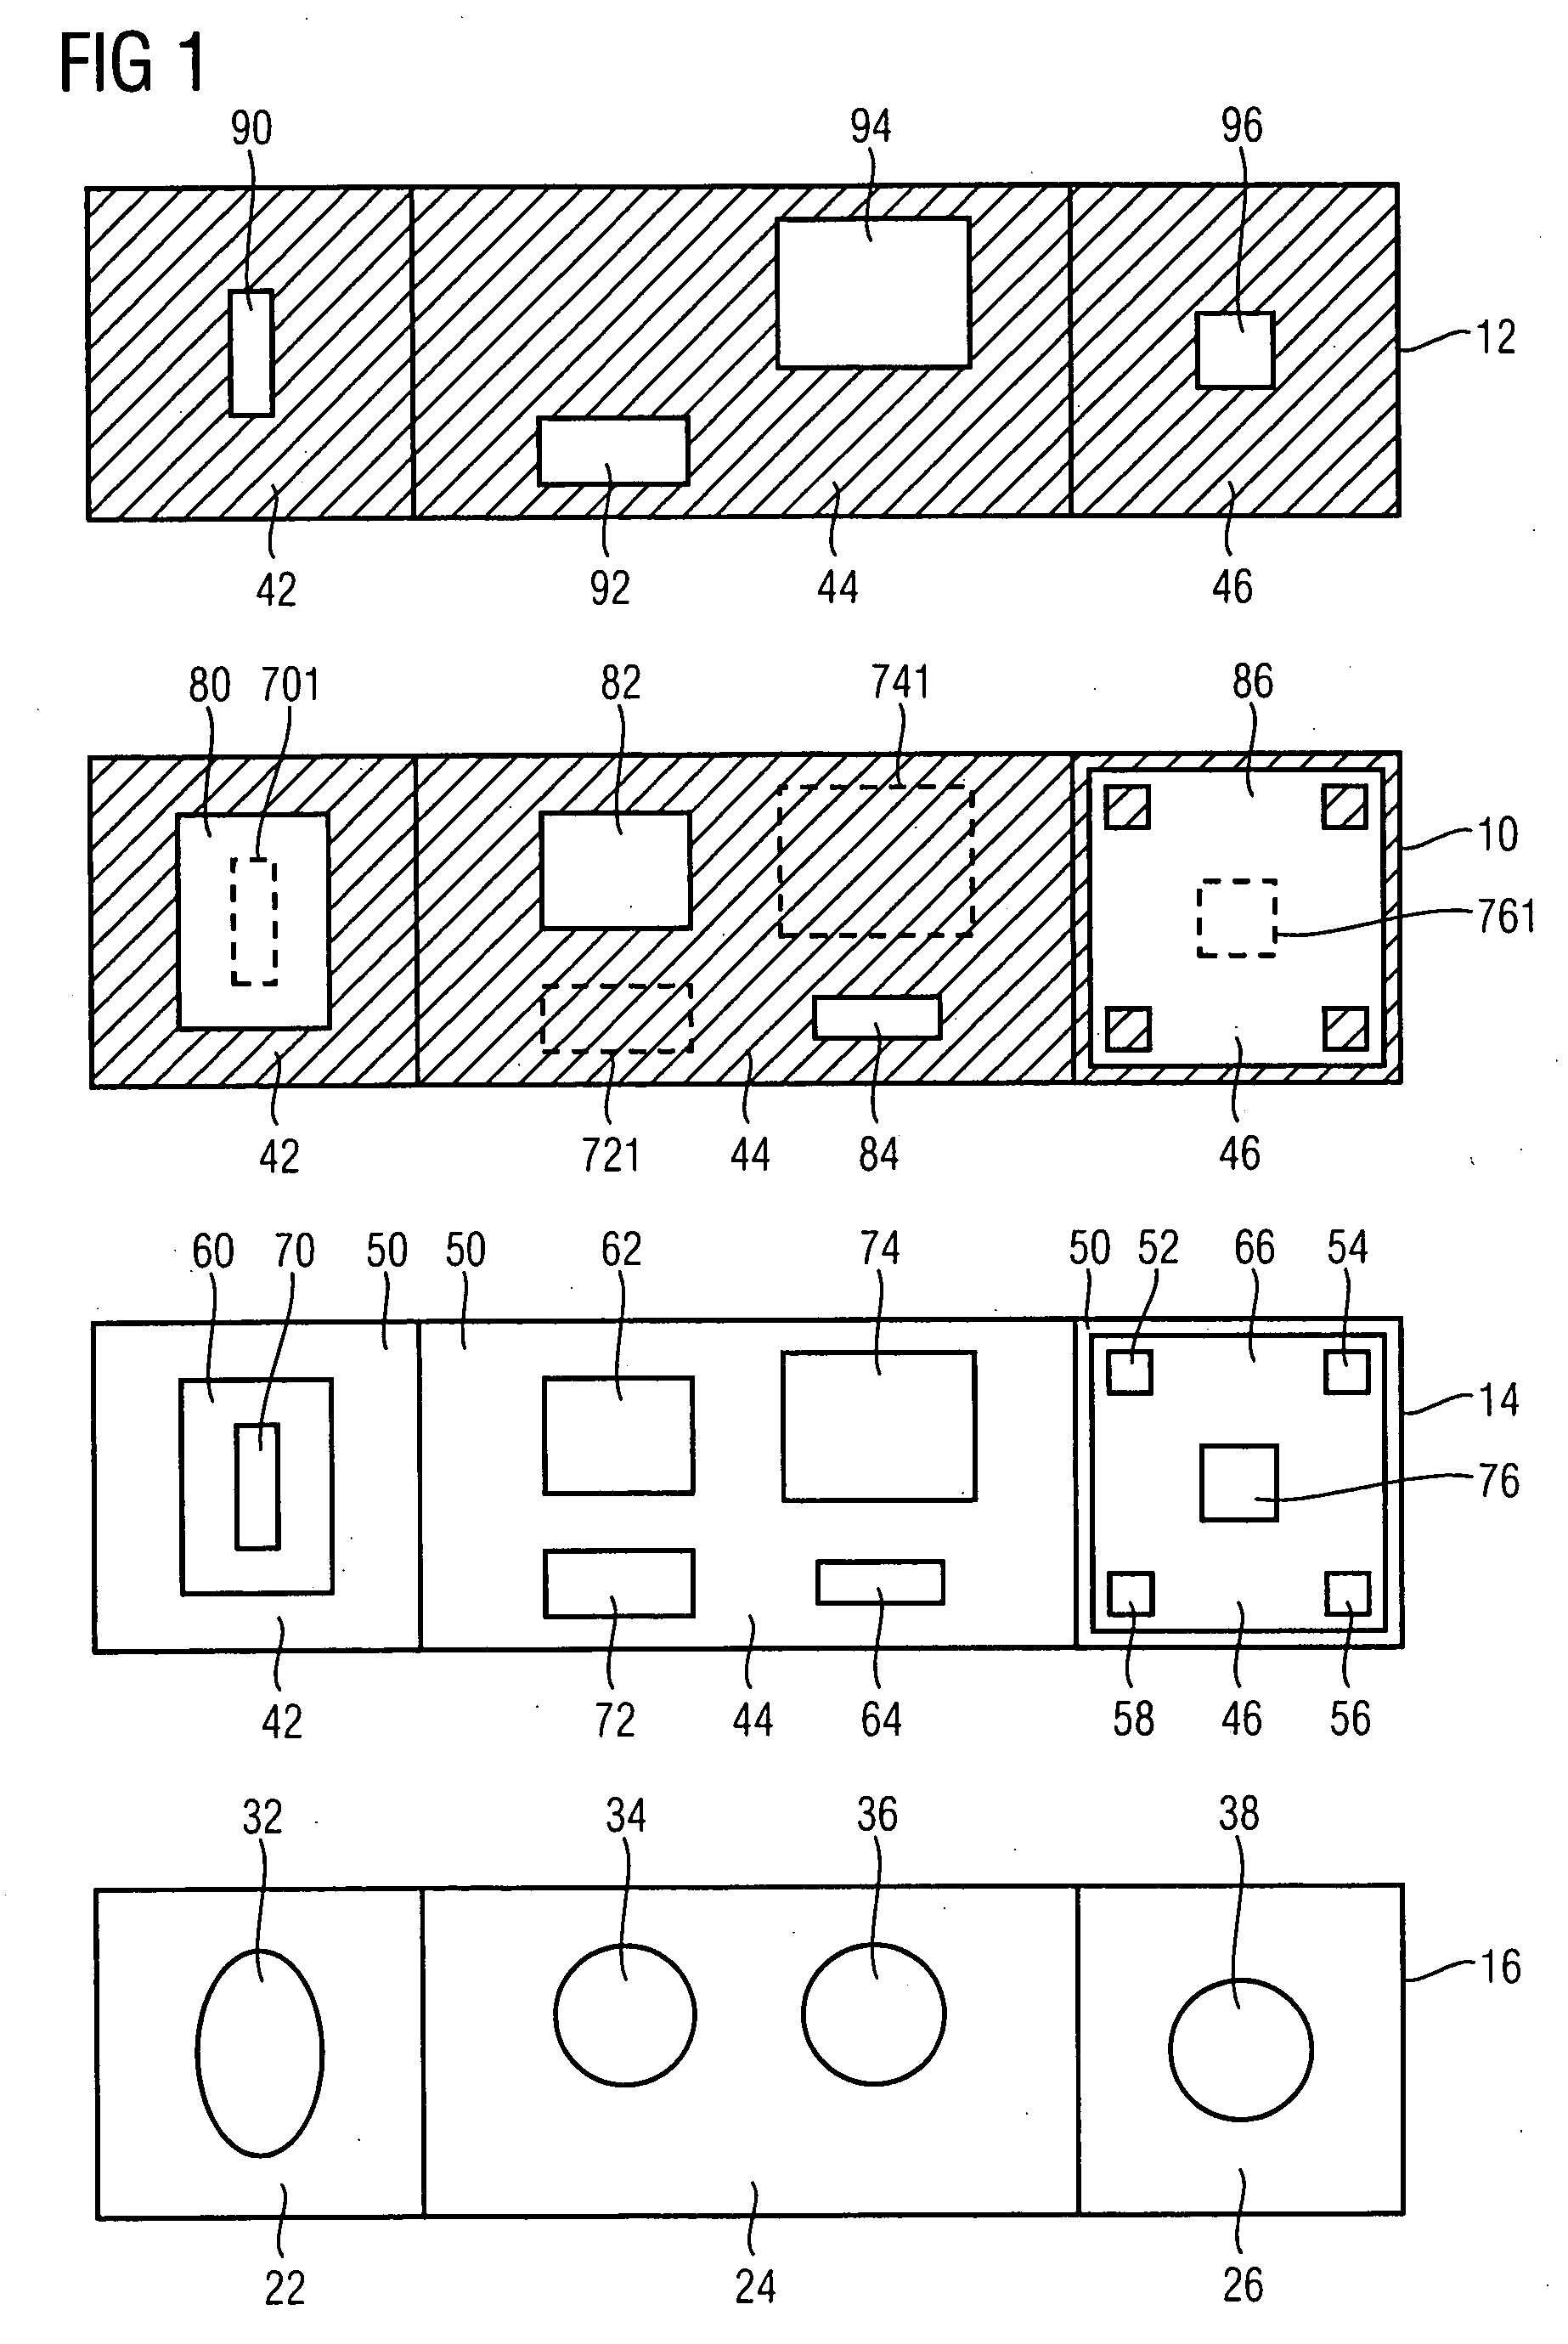 Lithography mask and methods for producing a lithography mask